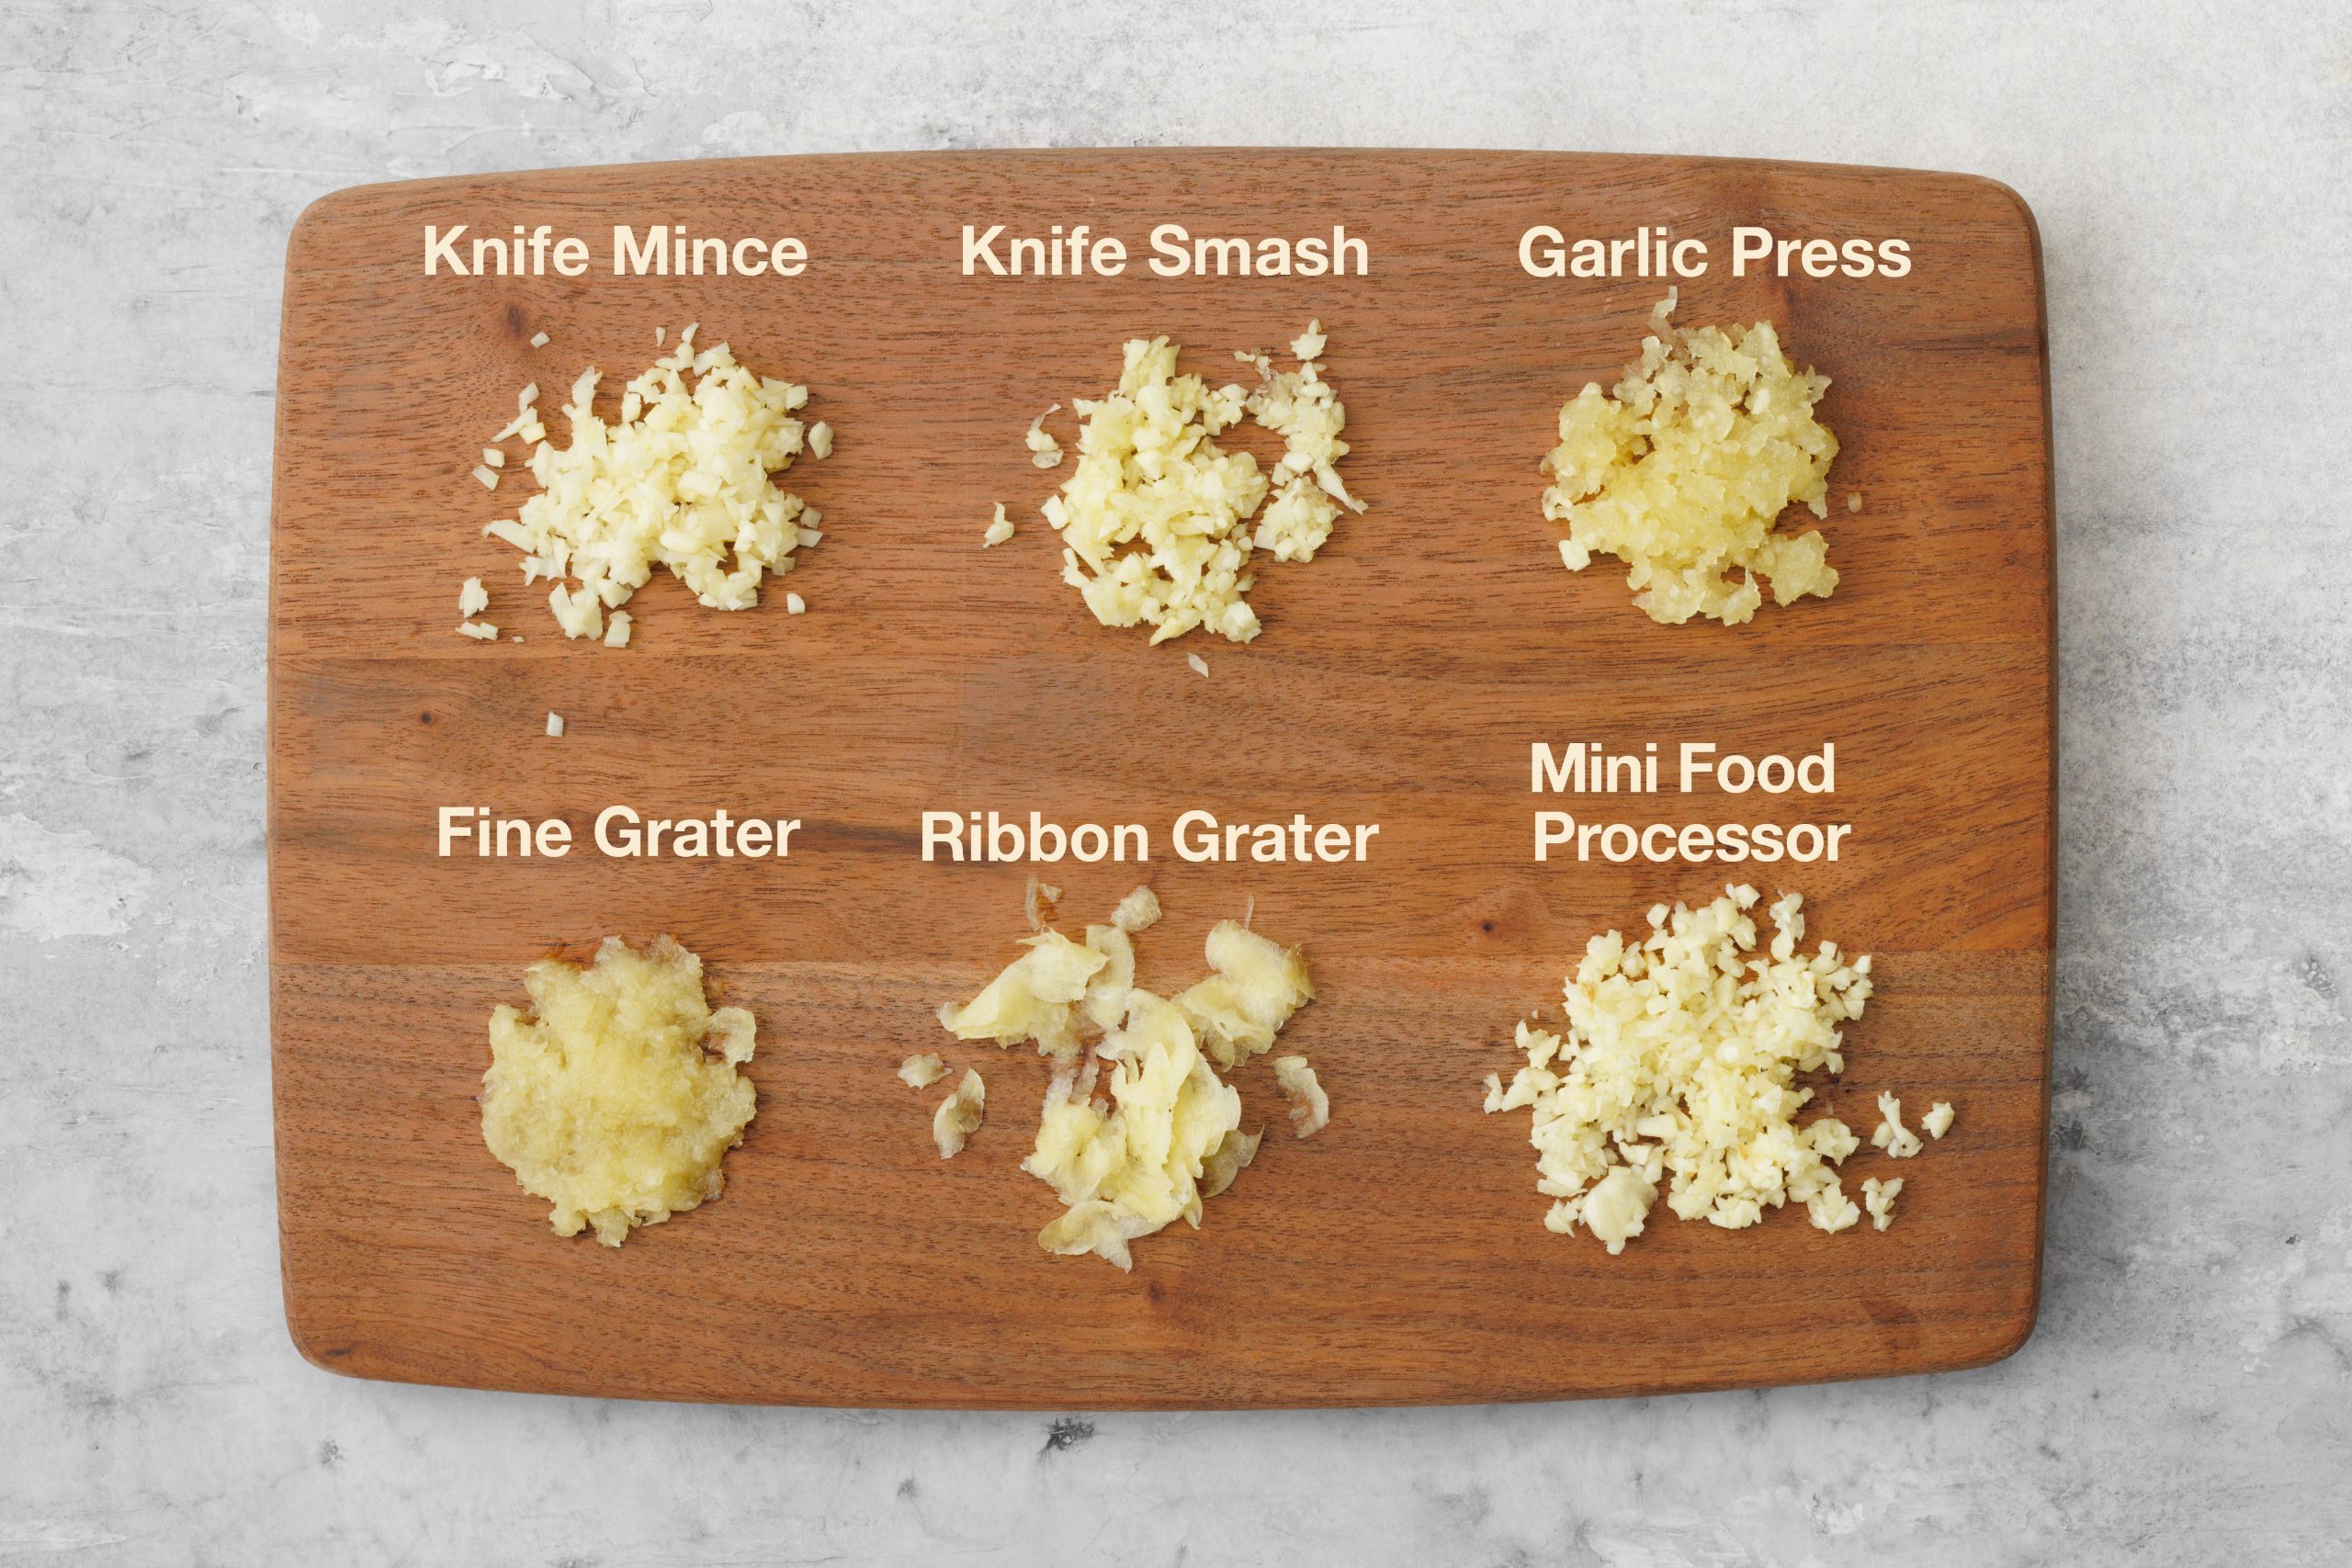 https://www.tasteofhome.com/wp-content/uploads/2017/09/how-to-mince-garlic-6-ways-labelled-01-scaled-1.jpg